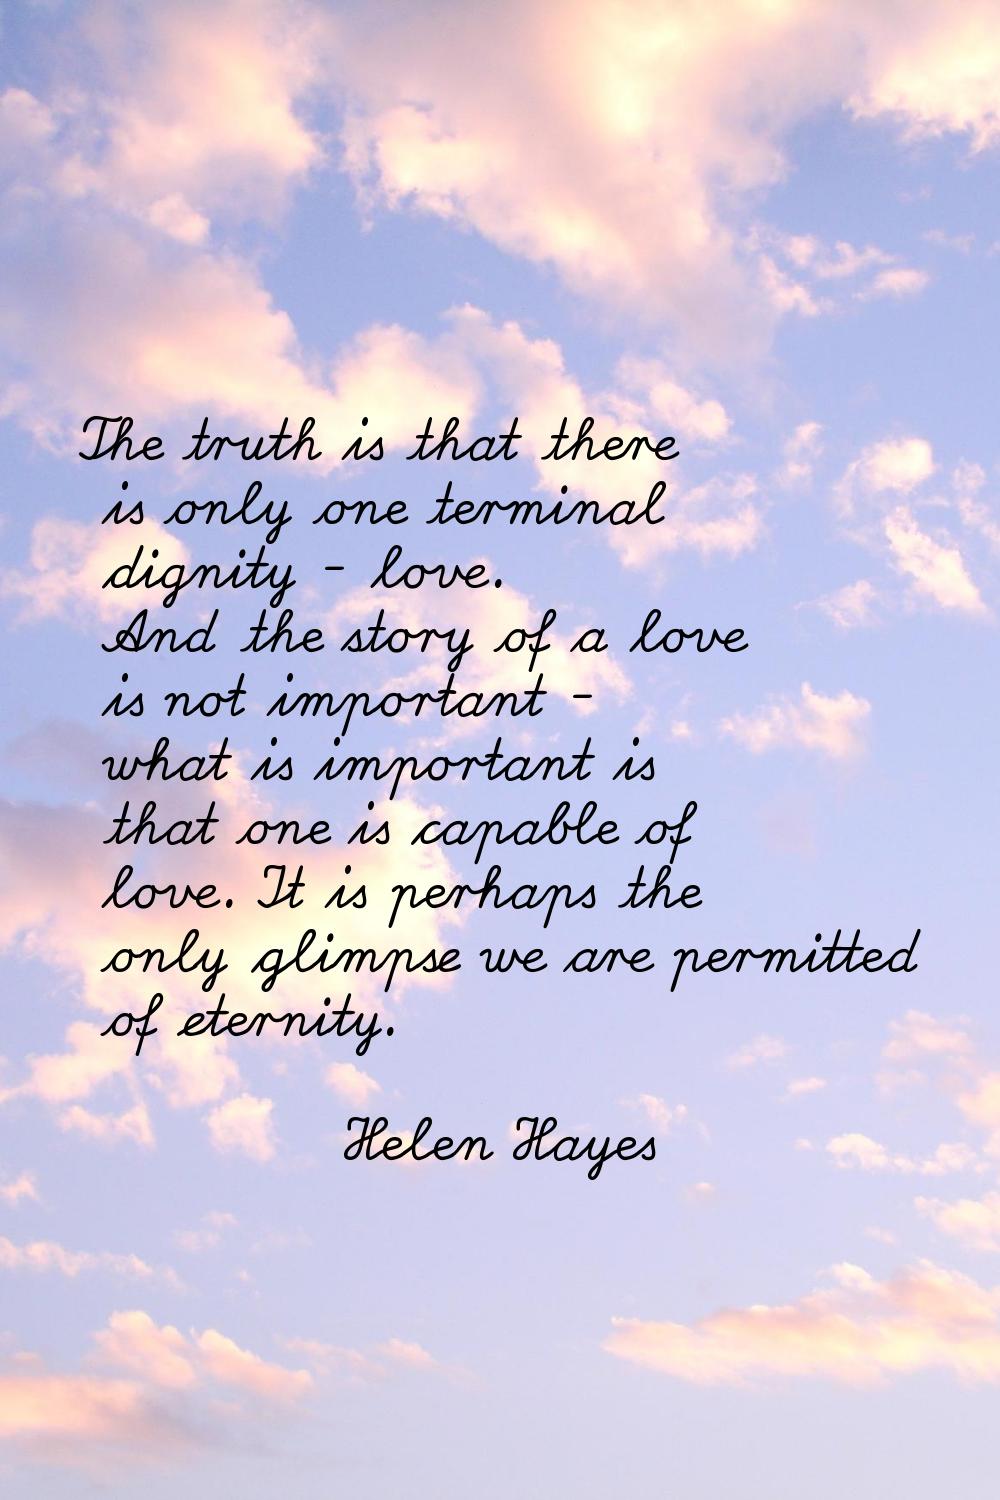 The truth is that there is only one terminal dignity - love. And the story of a love is not importa